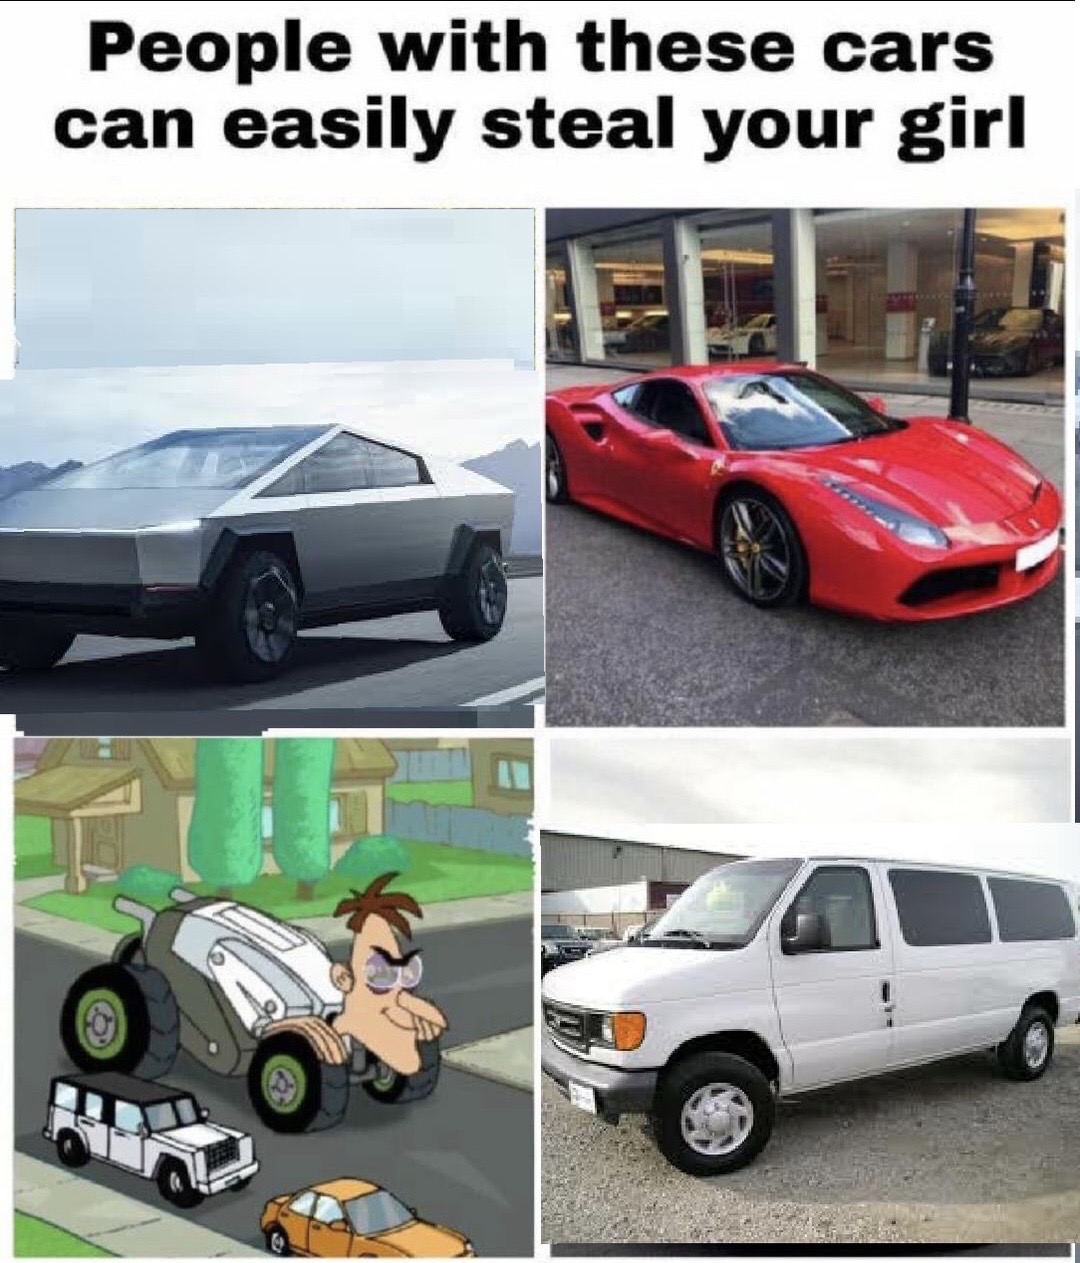 people with these cars can steal your girl - People with these cars can easily steal your girl